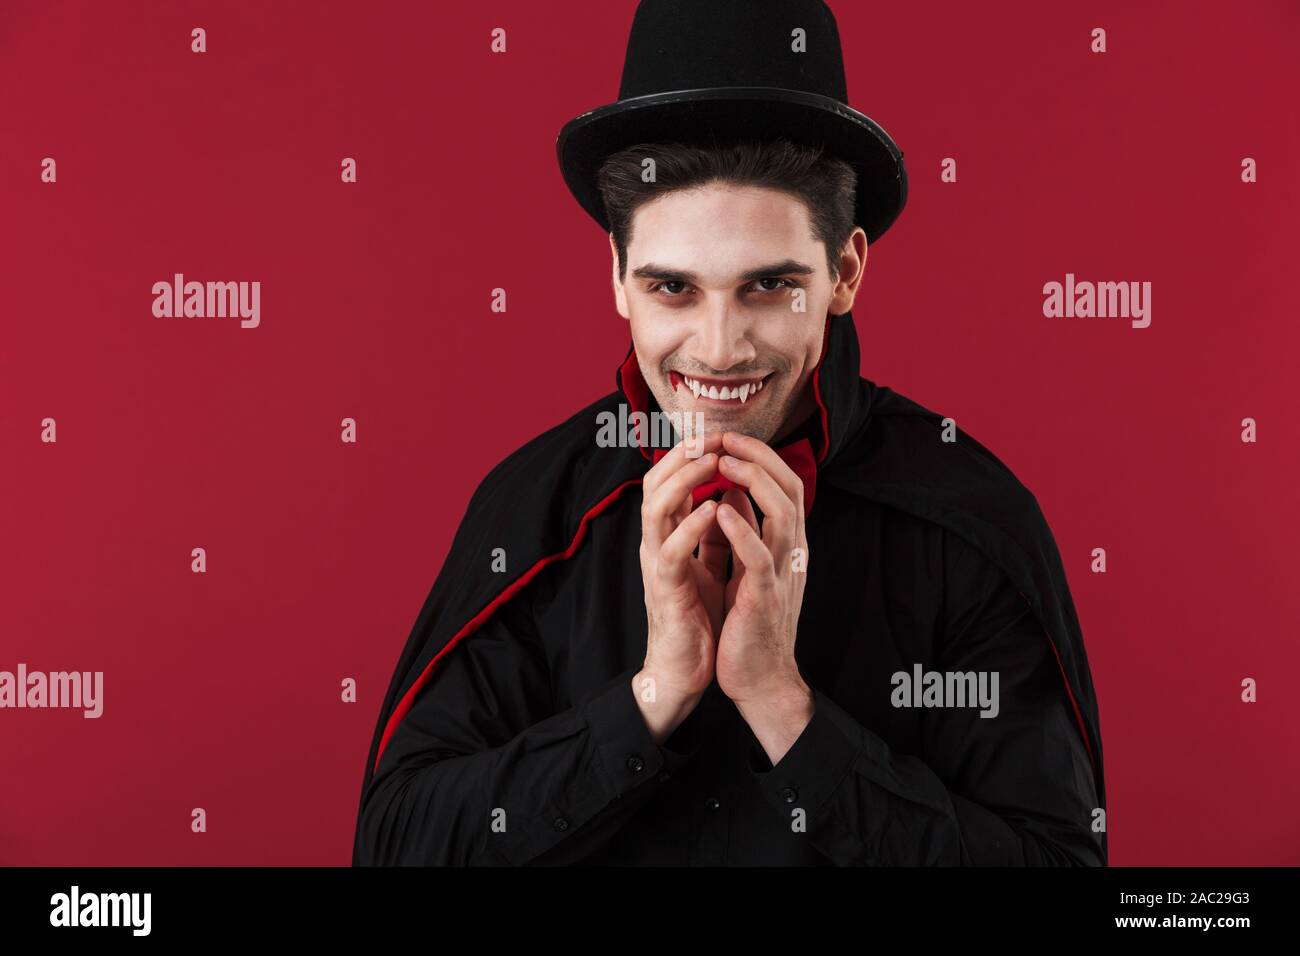 Image Of Scary Vampire Man With Blood And Fangs In Black